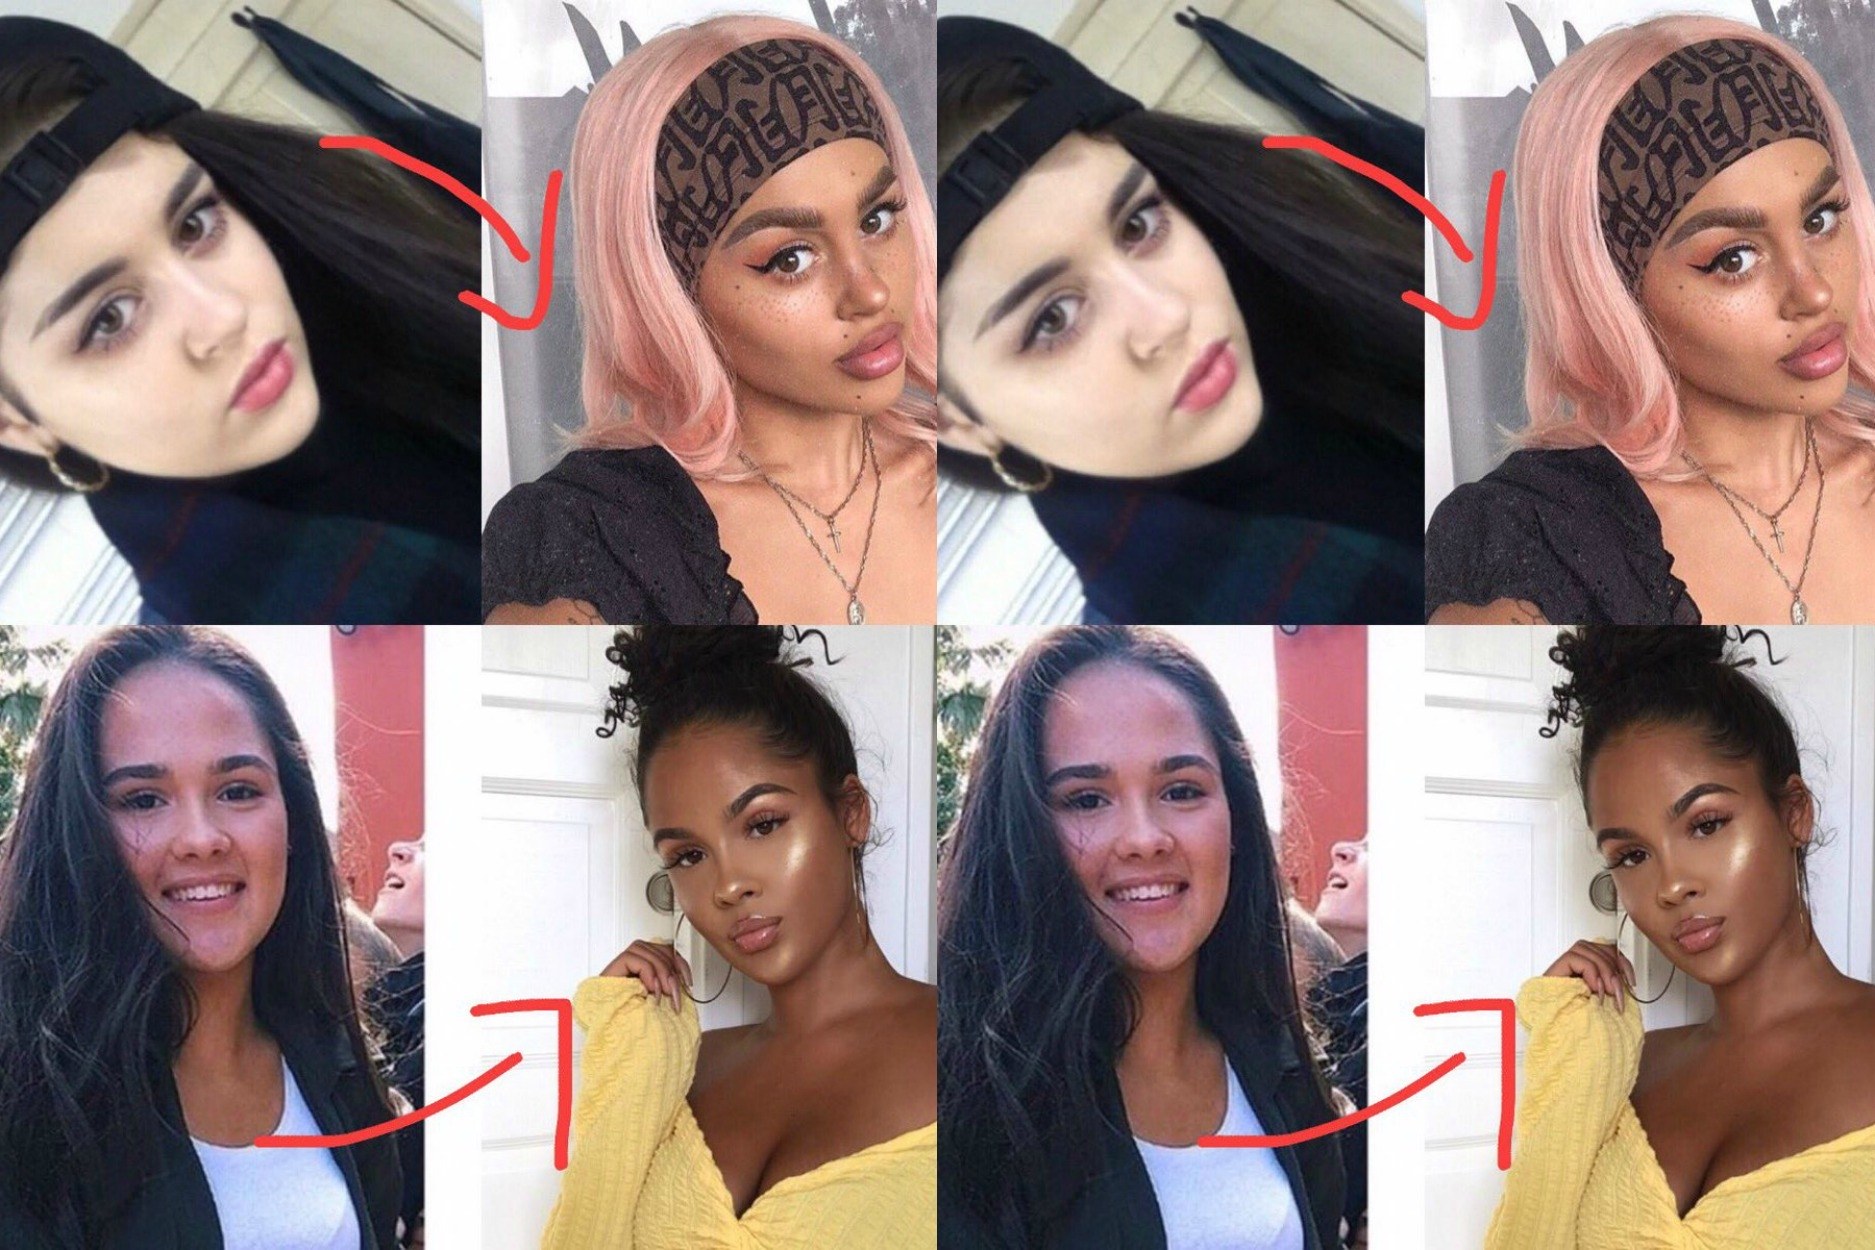 Some White Influencers Are Being Accused of "Blackfishing," or Using Makeup to Appear Black